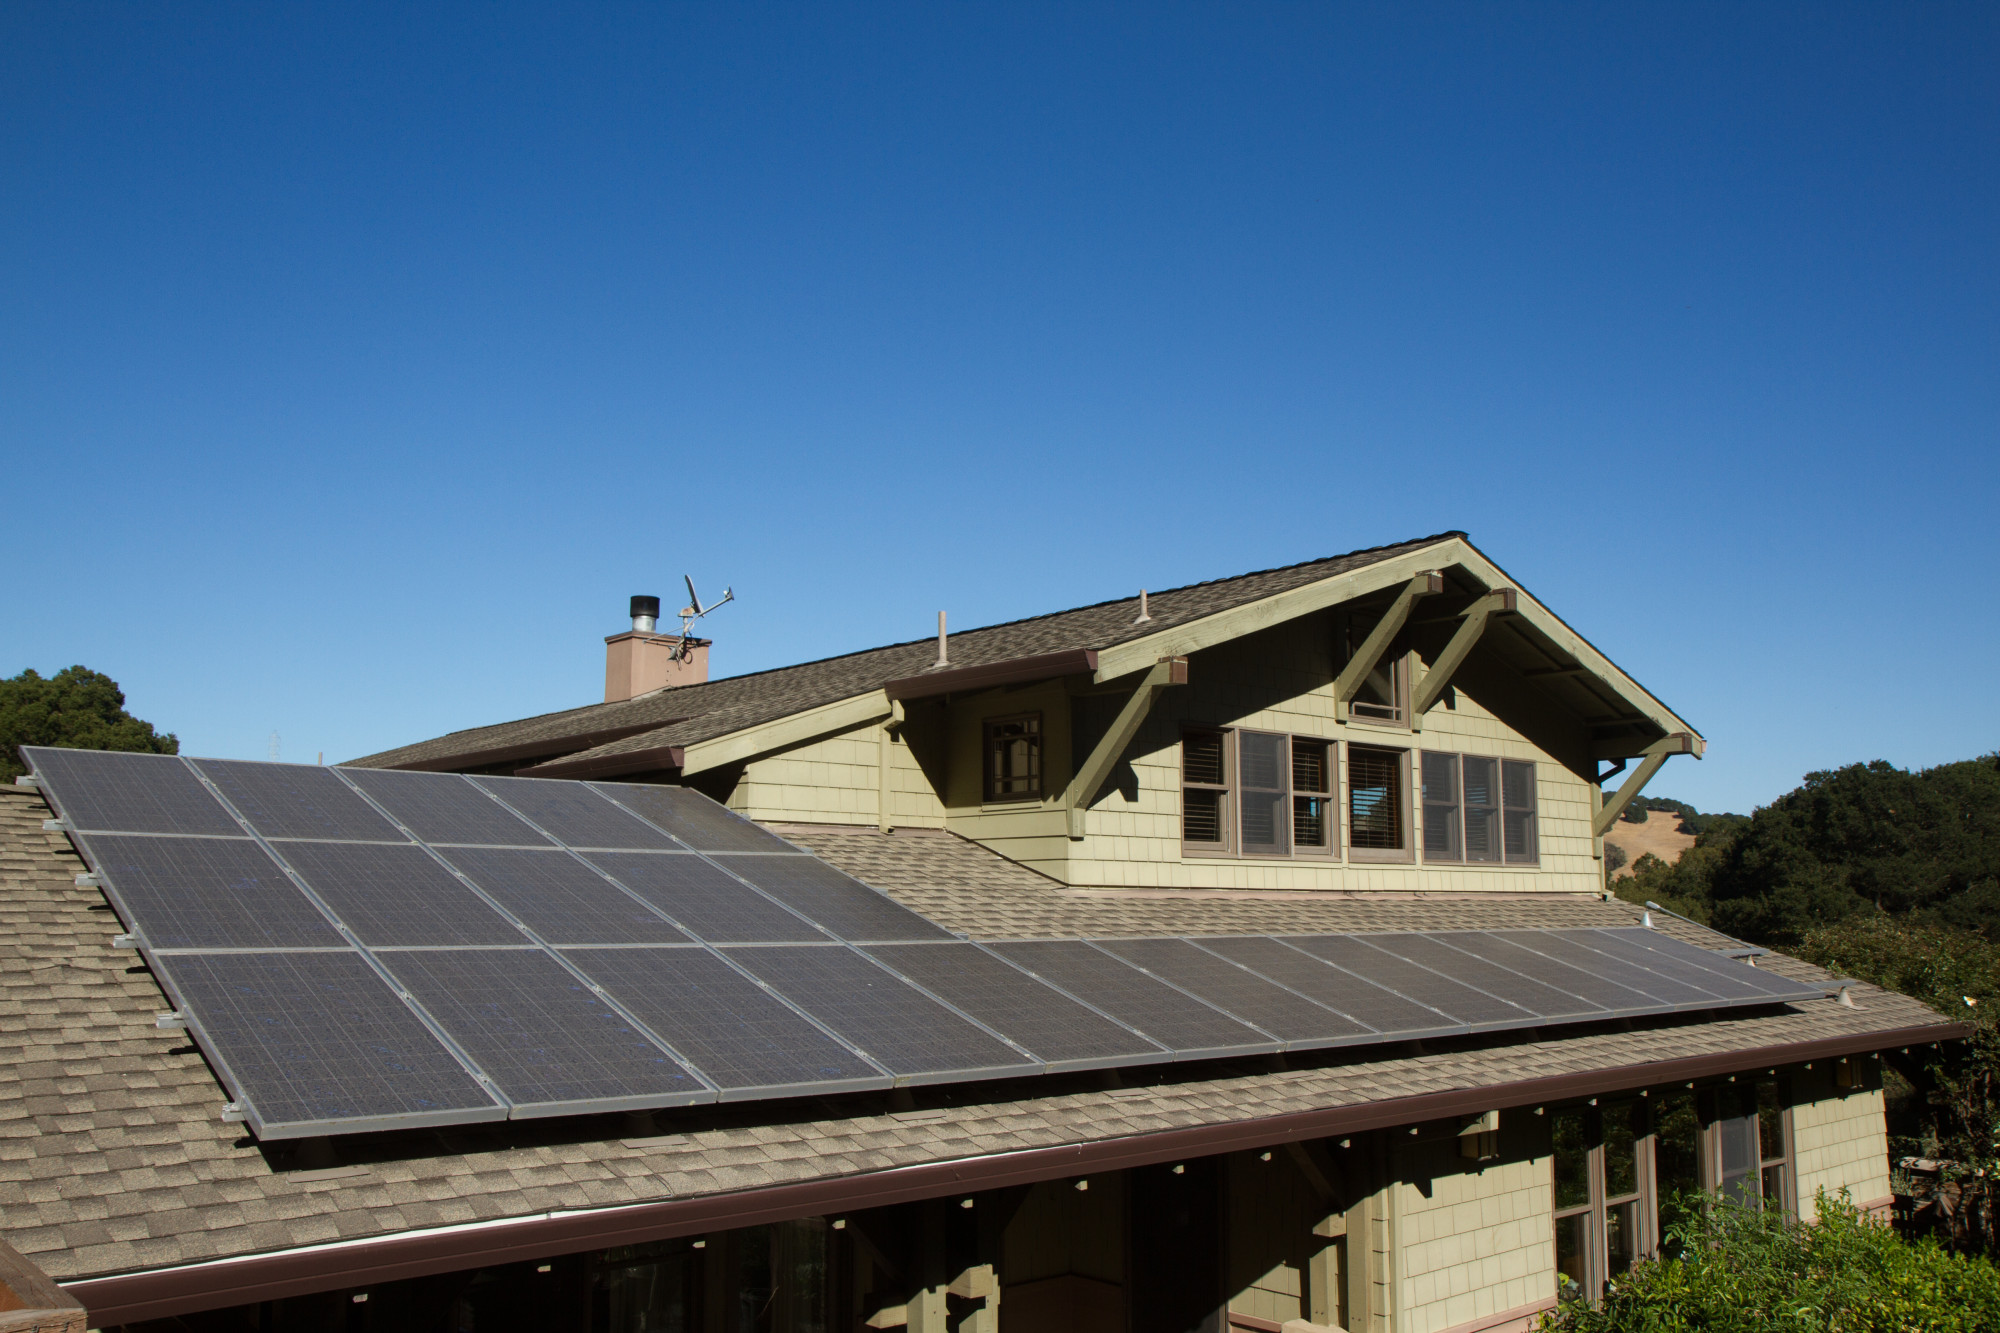 If you're thinking of making the switch to solar so you can save big, explore the factors that determine the cost of solar panels!